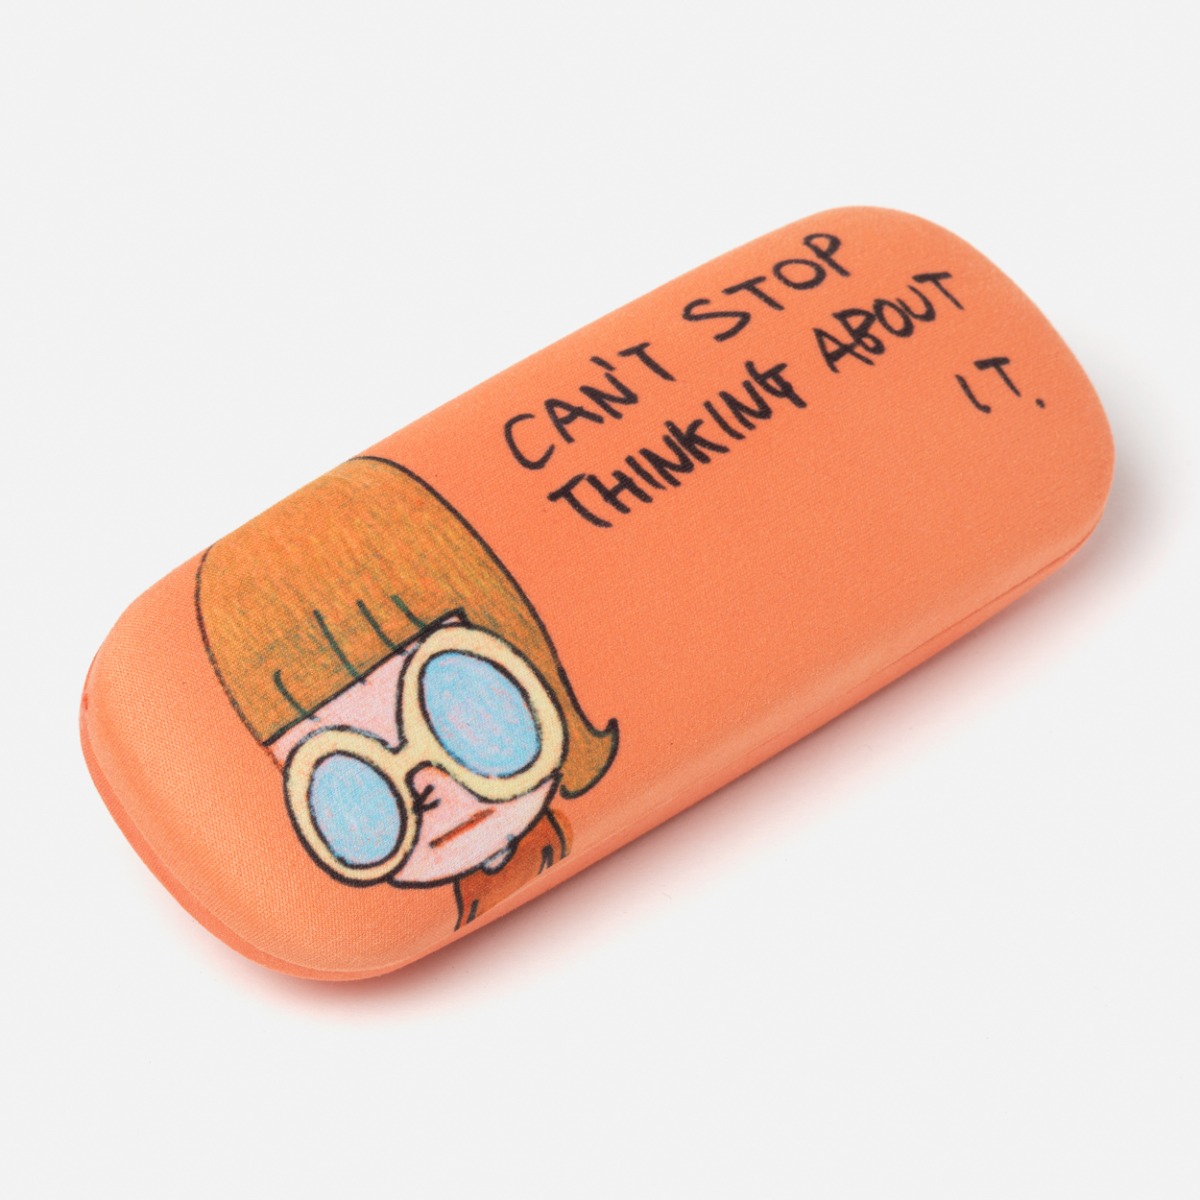 Glasses Case Can't Stop Thinking about It, 2011